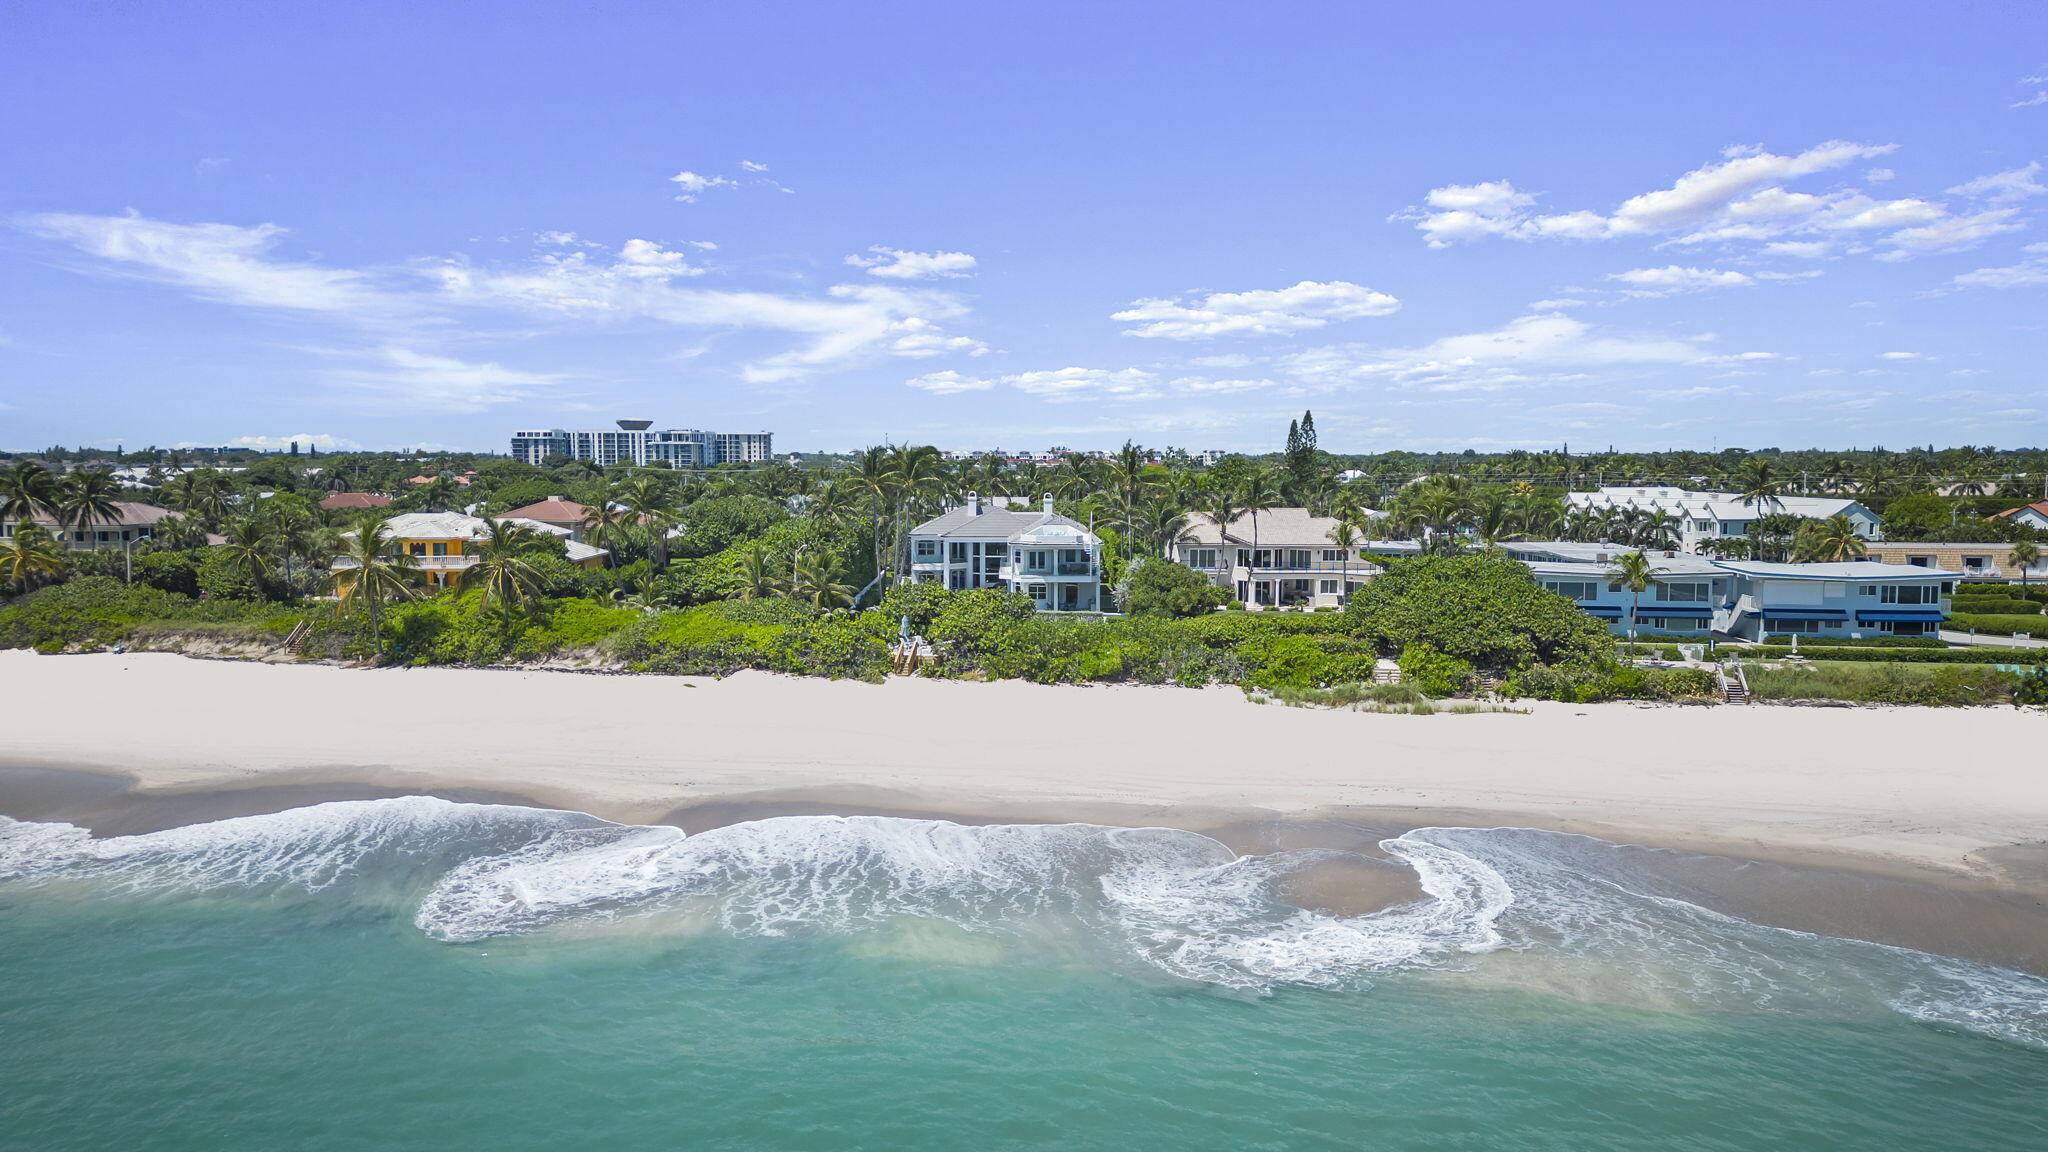 Completely renovated oceanfront estate home sited on a 3 4 acre lot including a spectacular private 100' x 124' ft direct oceanfront parcel.